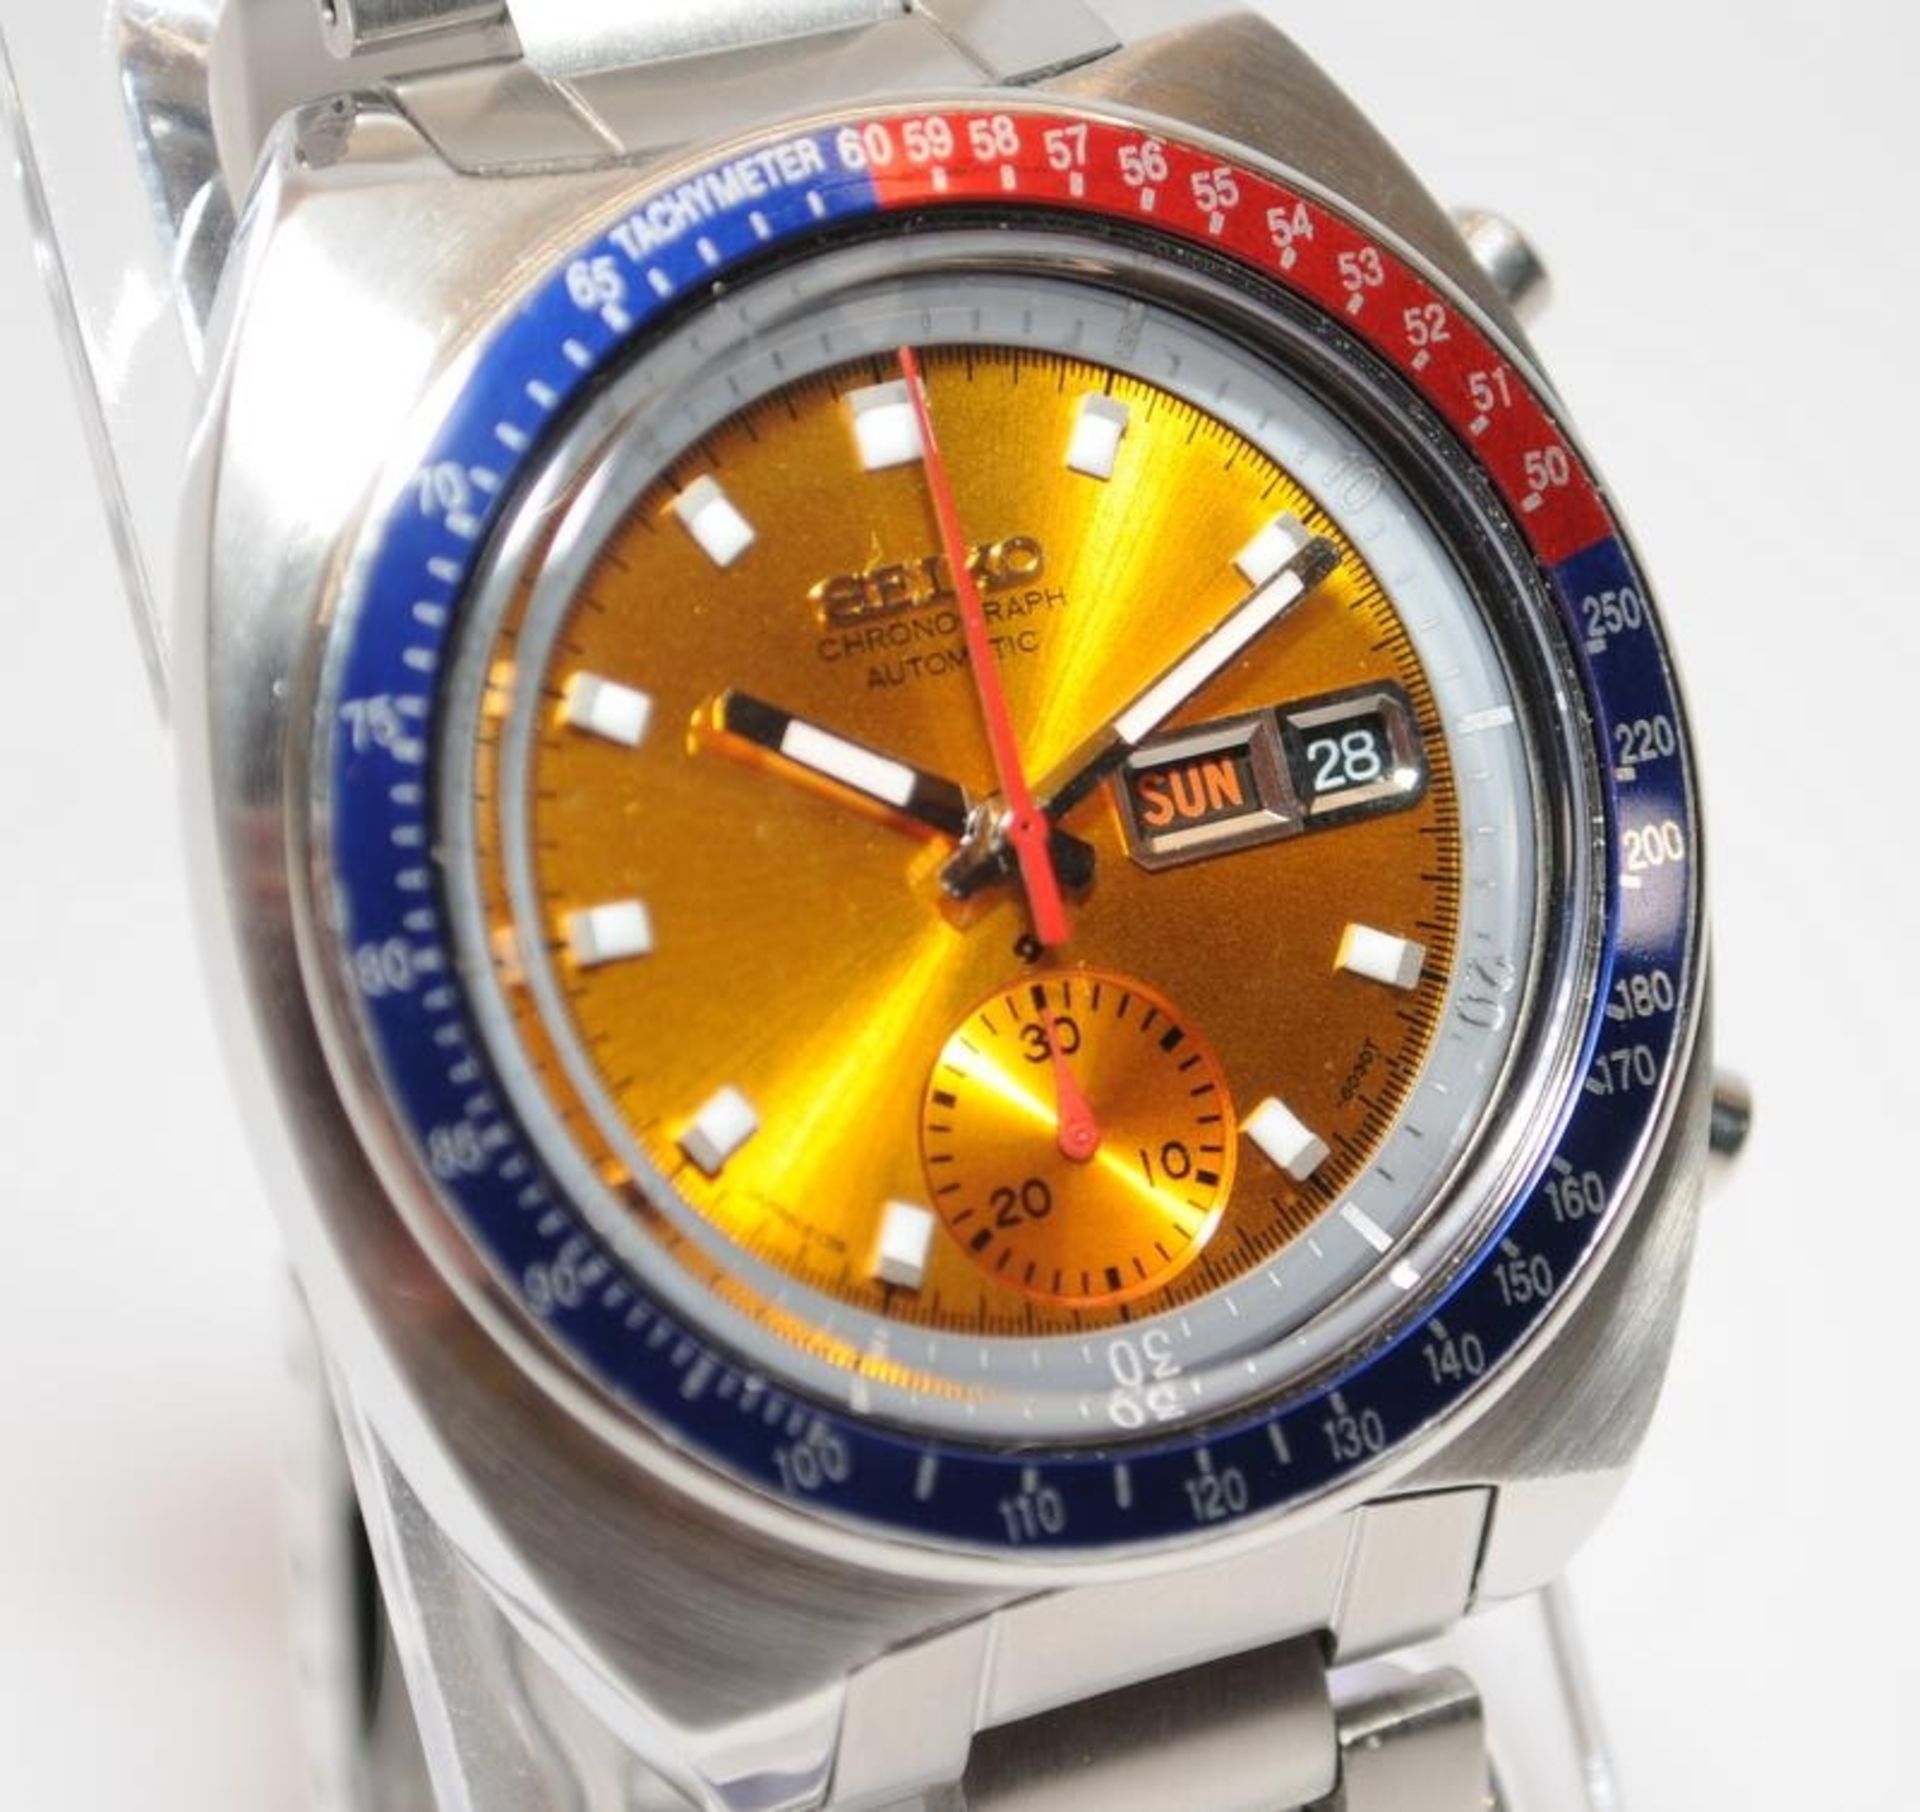 Vintage Seiko Pogue with the classic yellow dial gents automatic chronograph model ref 6139-6002, - Image 2 of 4